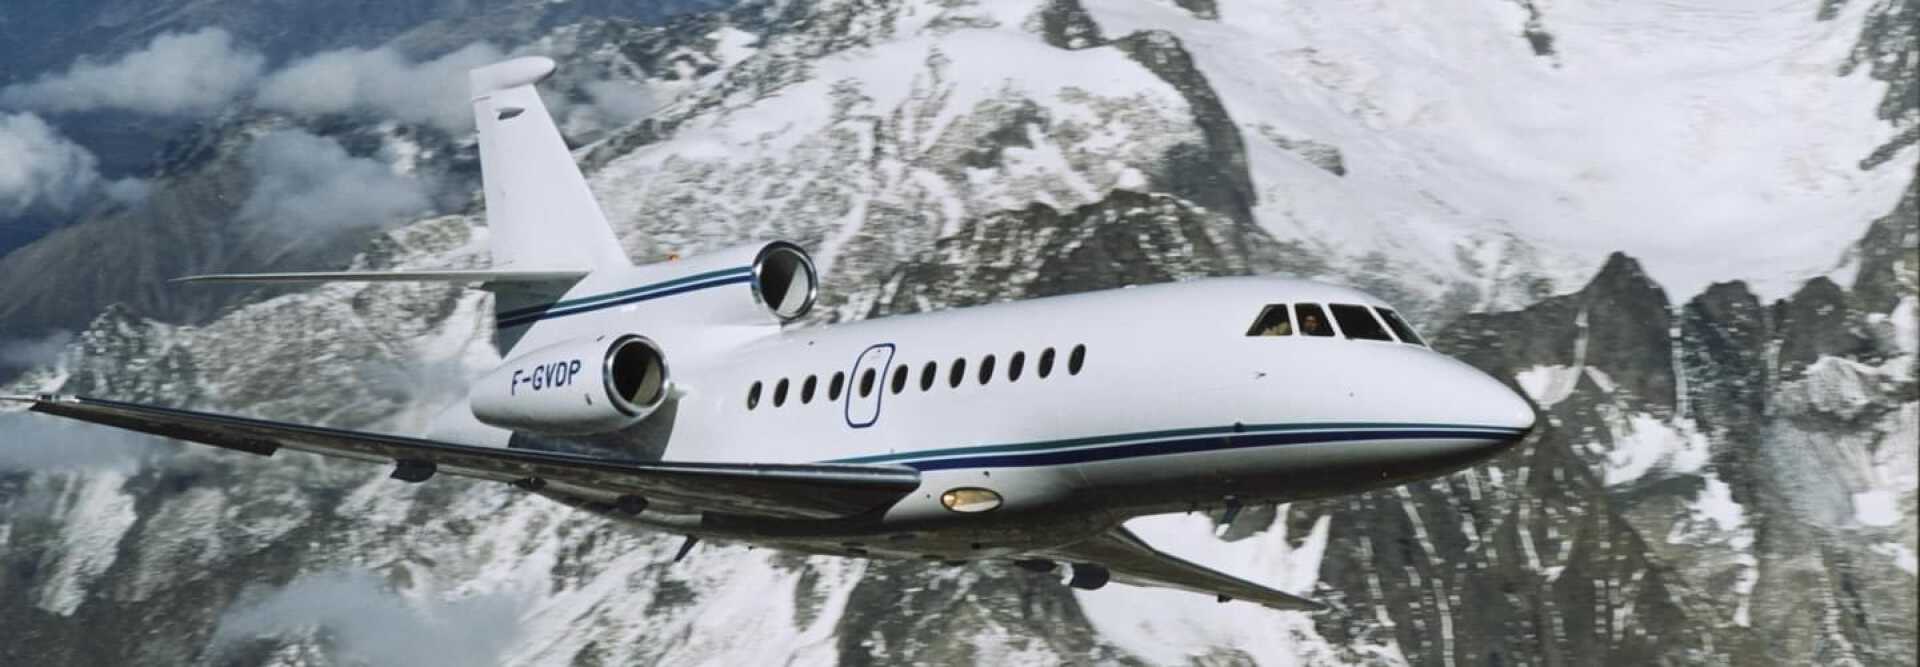 Super Large Business Jet Dassault Falcon 900 to charter for private aviation flights with LunaJets for long-haul trips, speed and efficiency